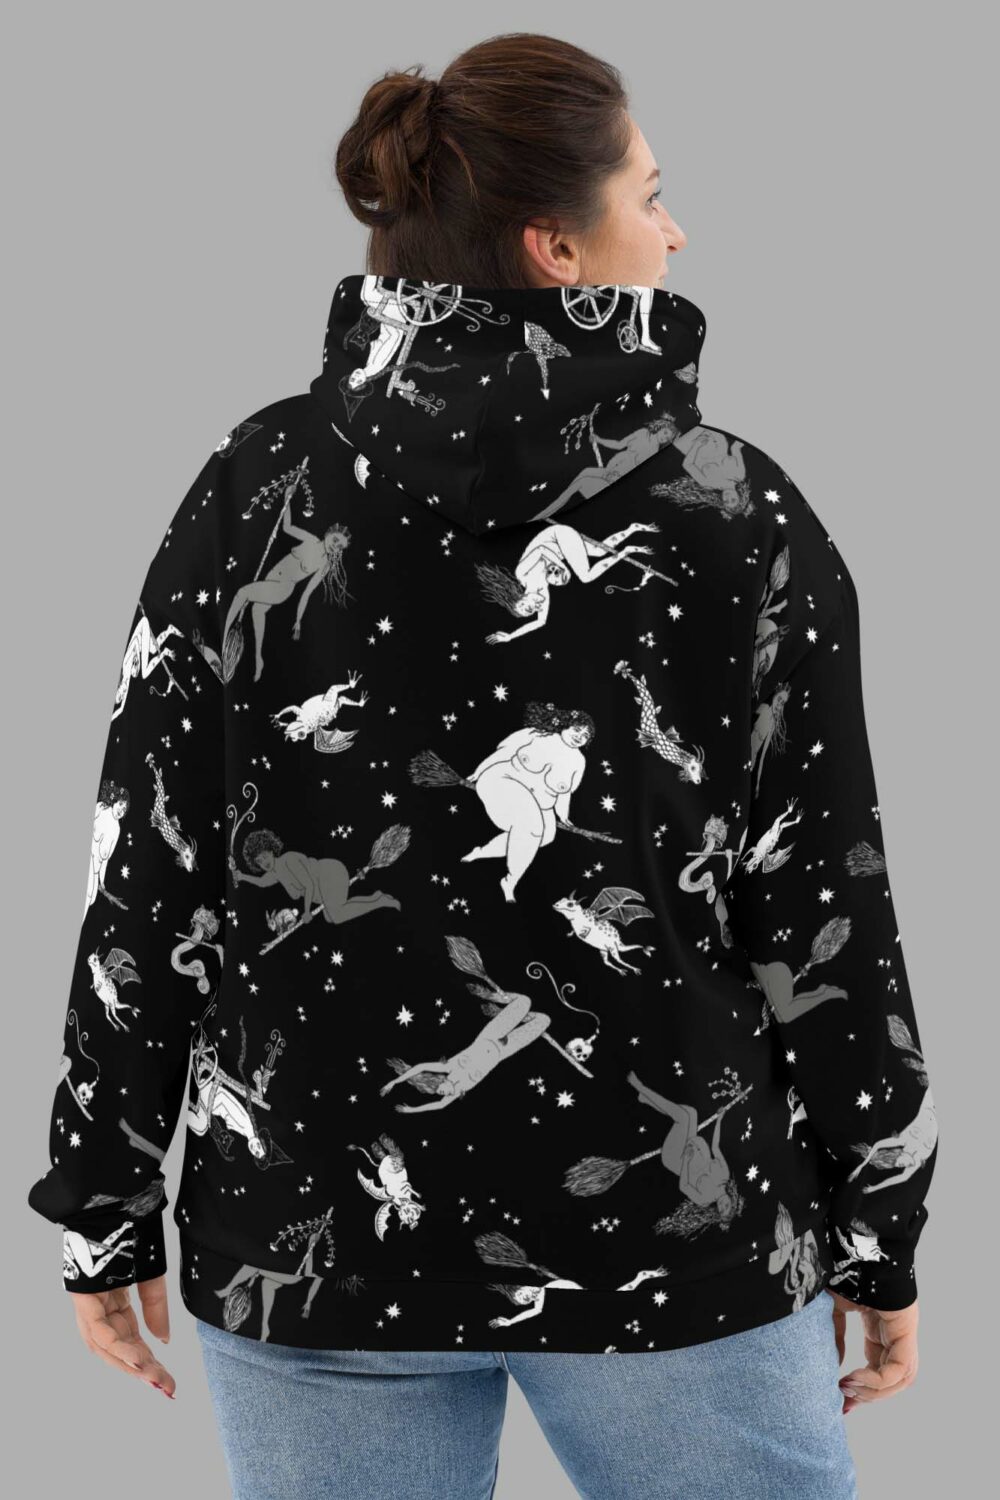 cosmic drifters hoodie back intersectional witches print